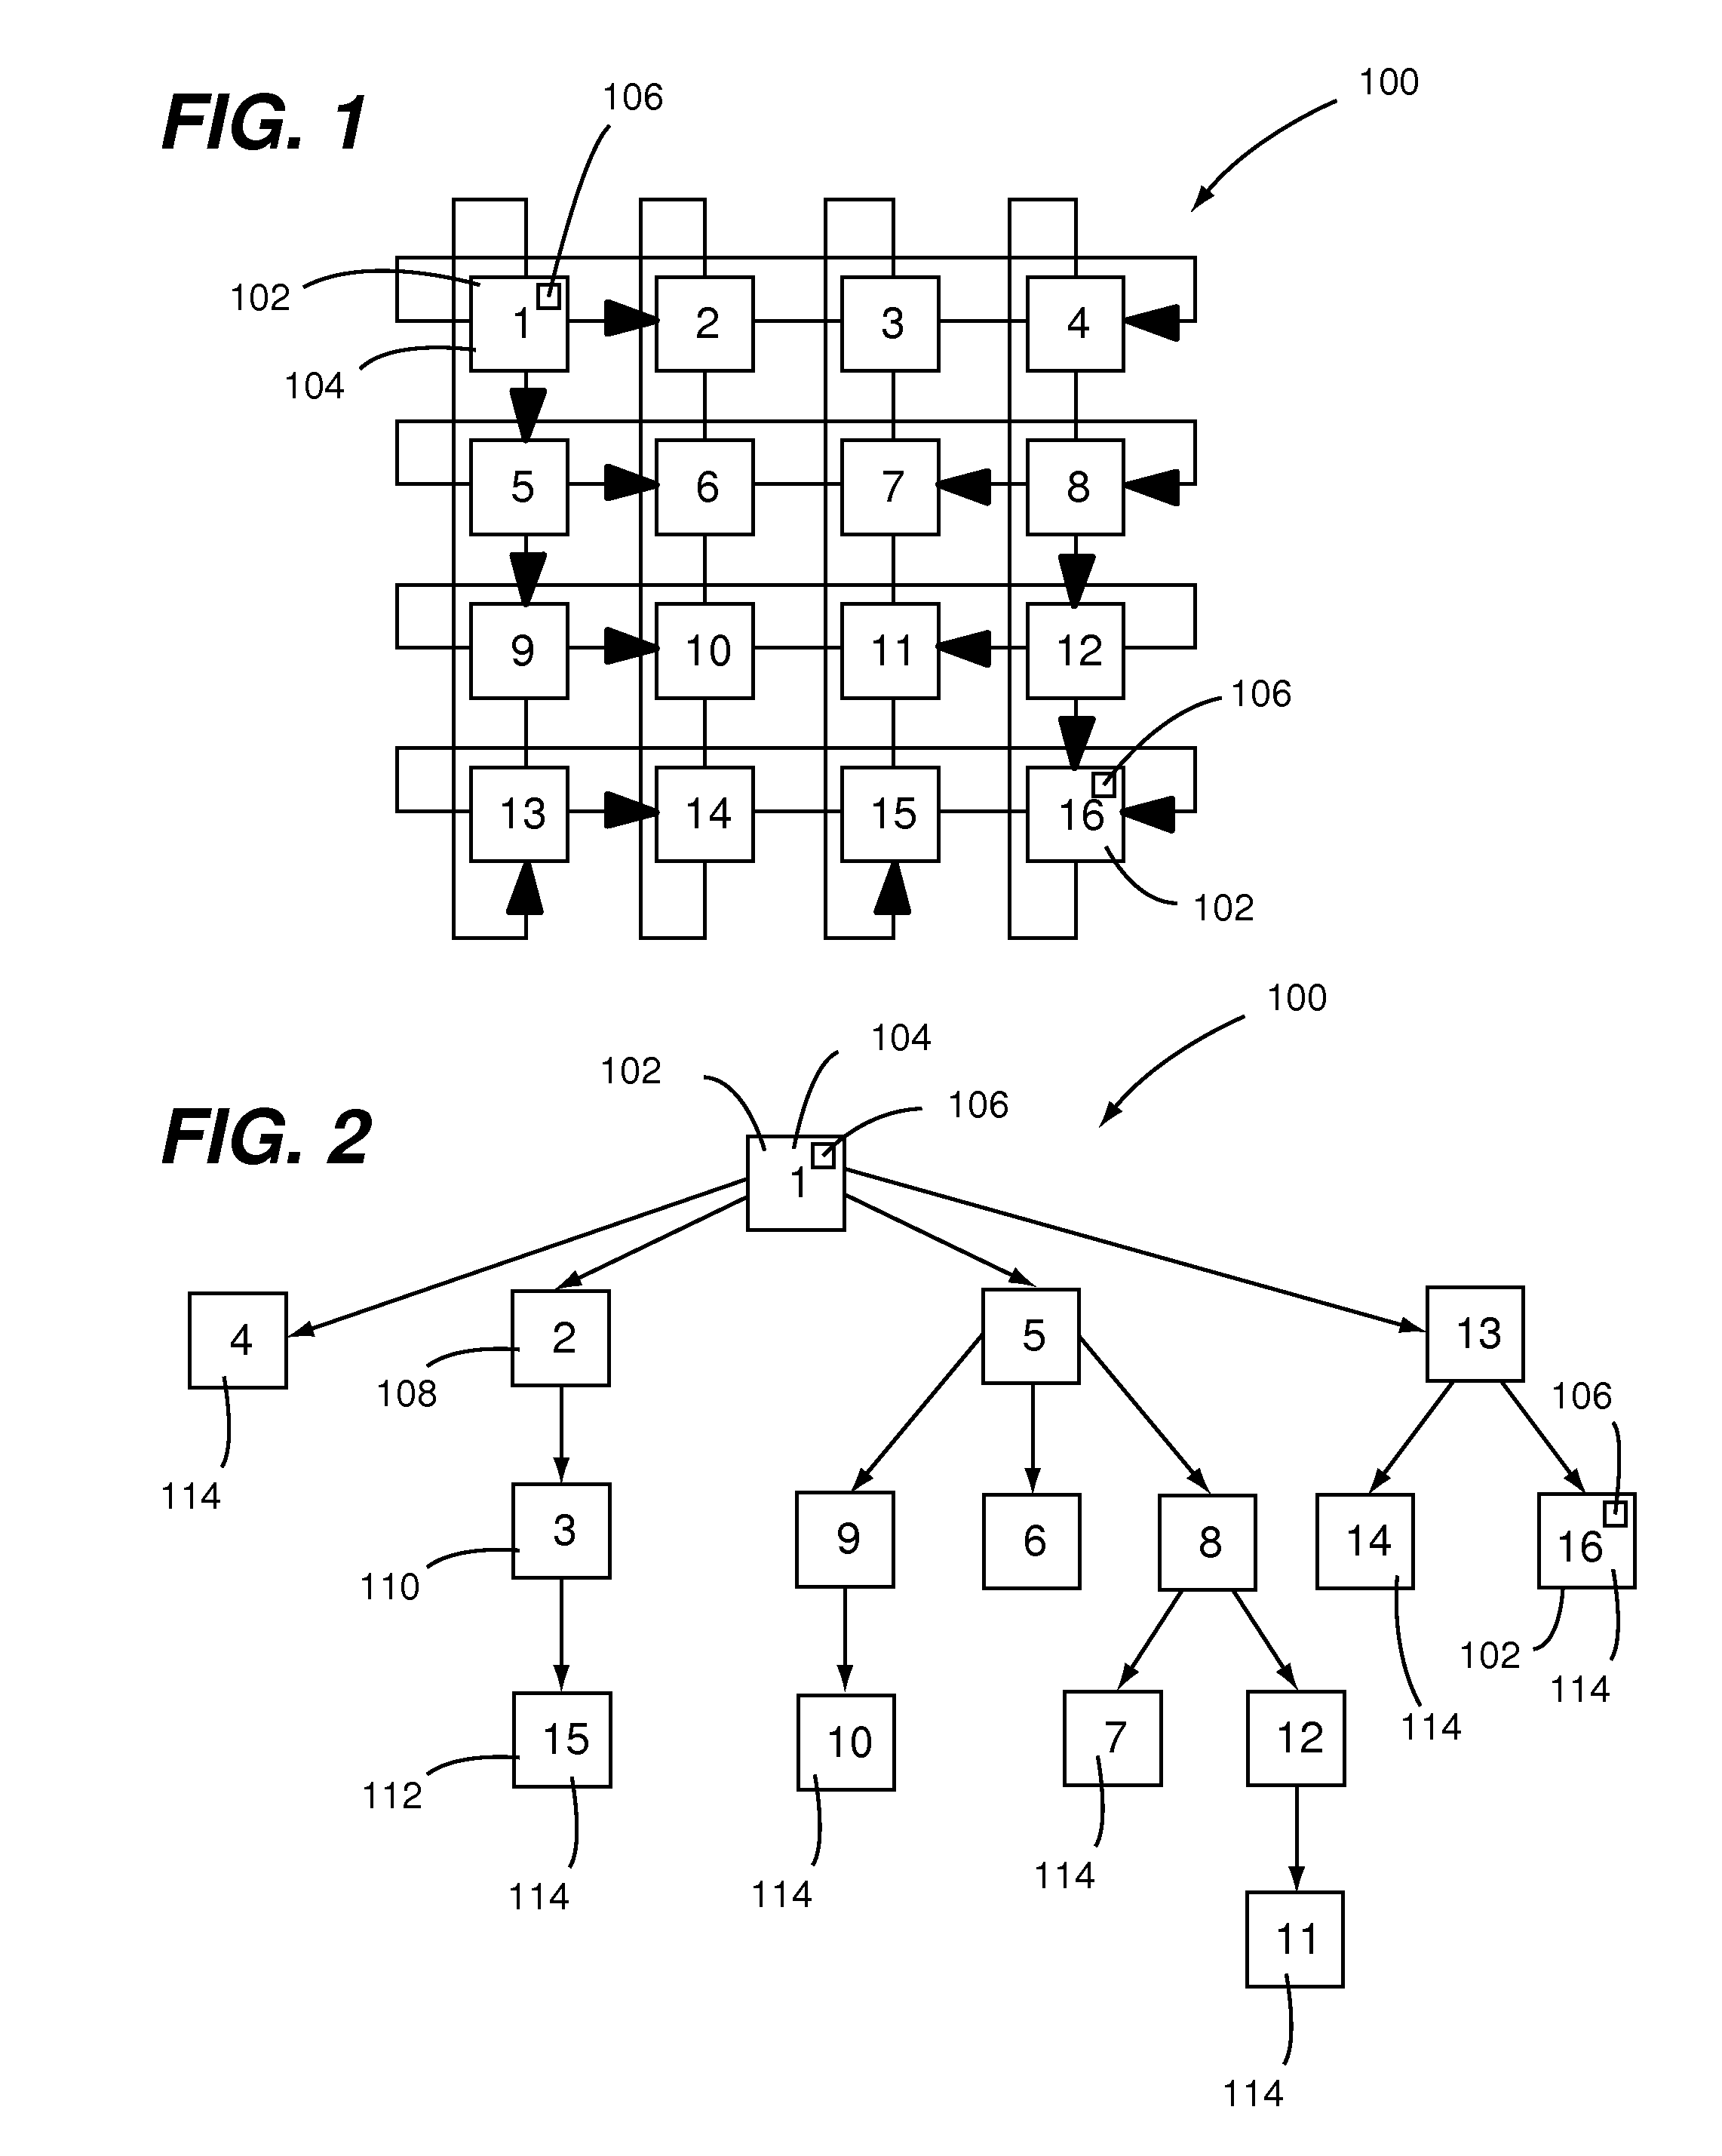 Time synchronization between nodes of a switched interconnect fabric